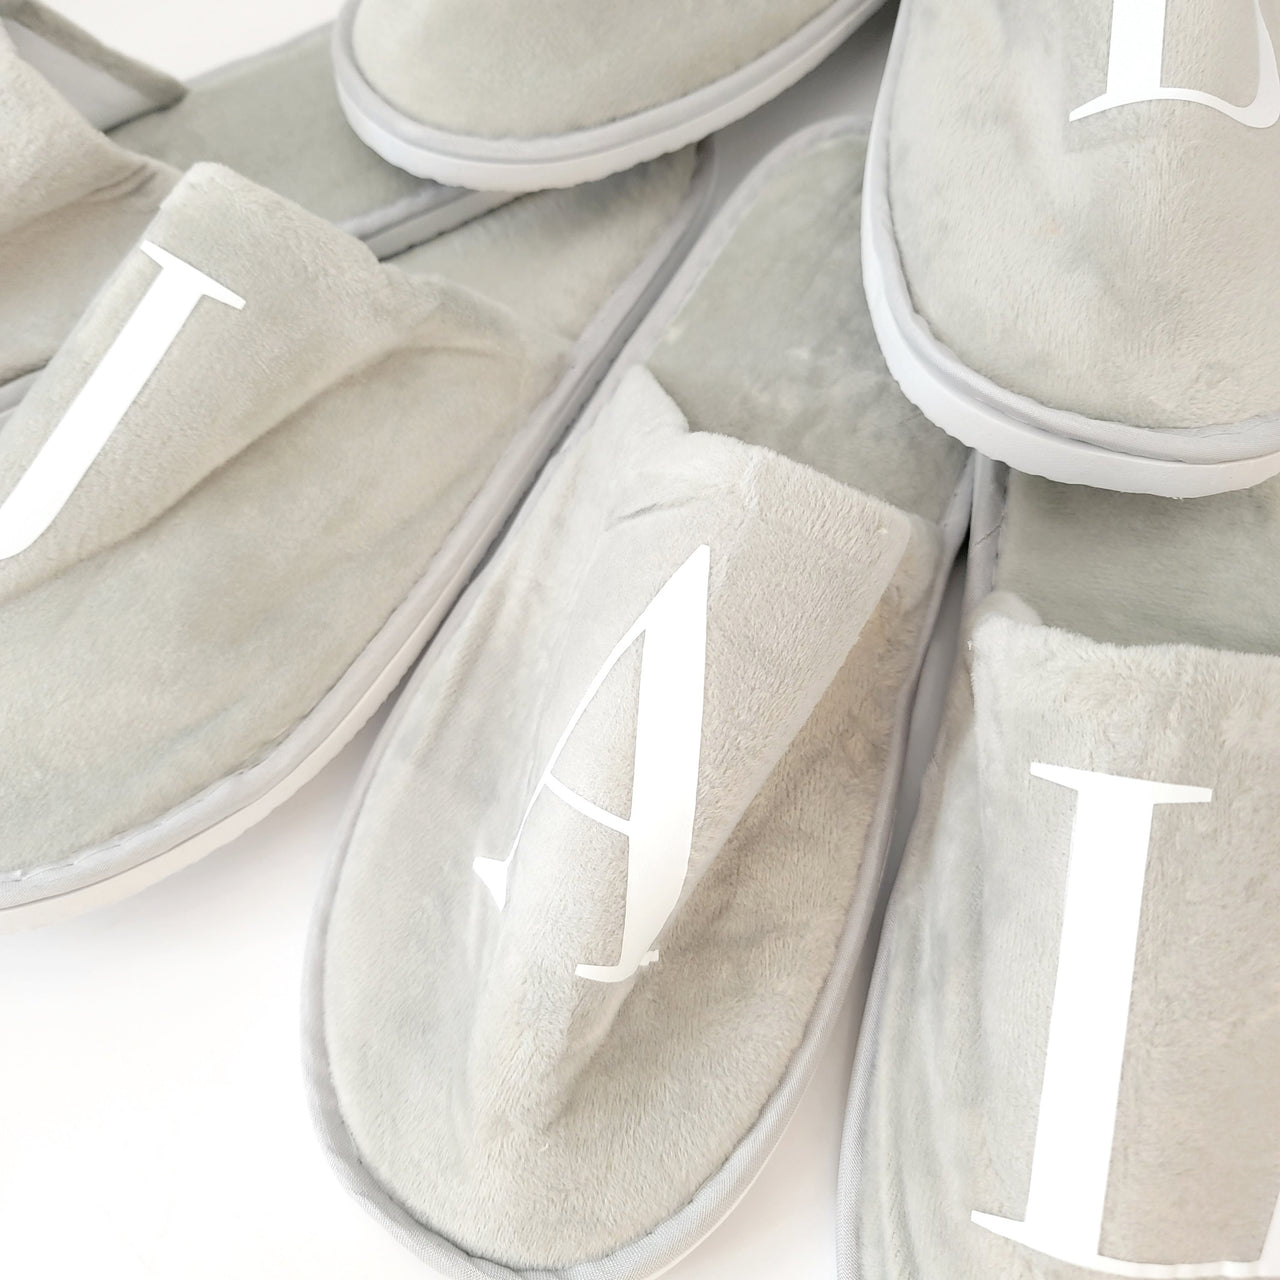 Personalized Guest Slippers Set - Monogrammed Houseguest Slippers - Bridesmaids Slippers - Hotel Spa Slippers - Airbnb Slippers Set